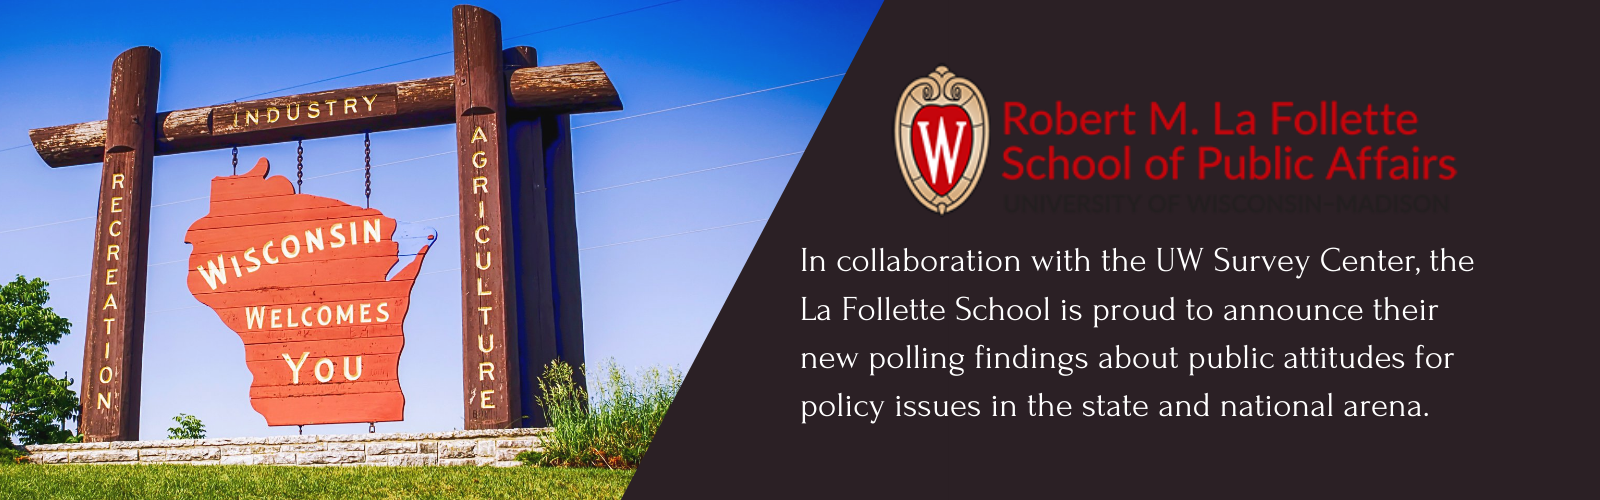 Image of Welcome to Wisconsin sign on the left. On the right is the UW-Madison Crest with "Robert M. La Follette School of Public Affairs". Below is text that says "In collaboration with the UW Survey Center, the La Follette School is proud to announce our new polling findings about public attitudes for policy issues in the state and national arena. "